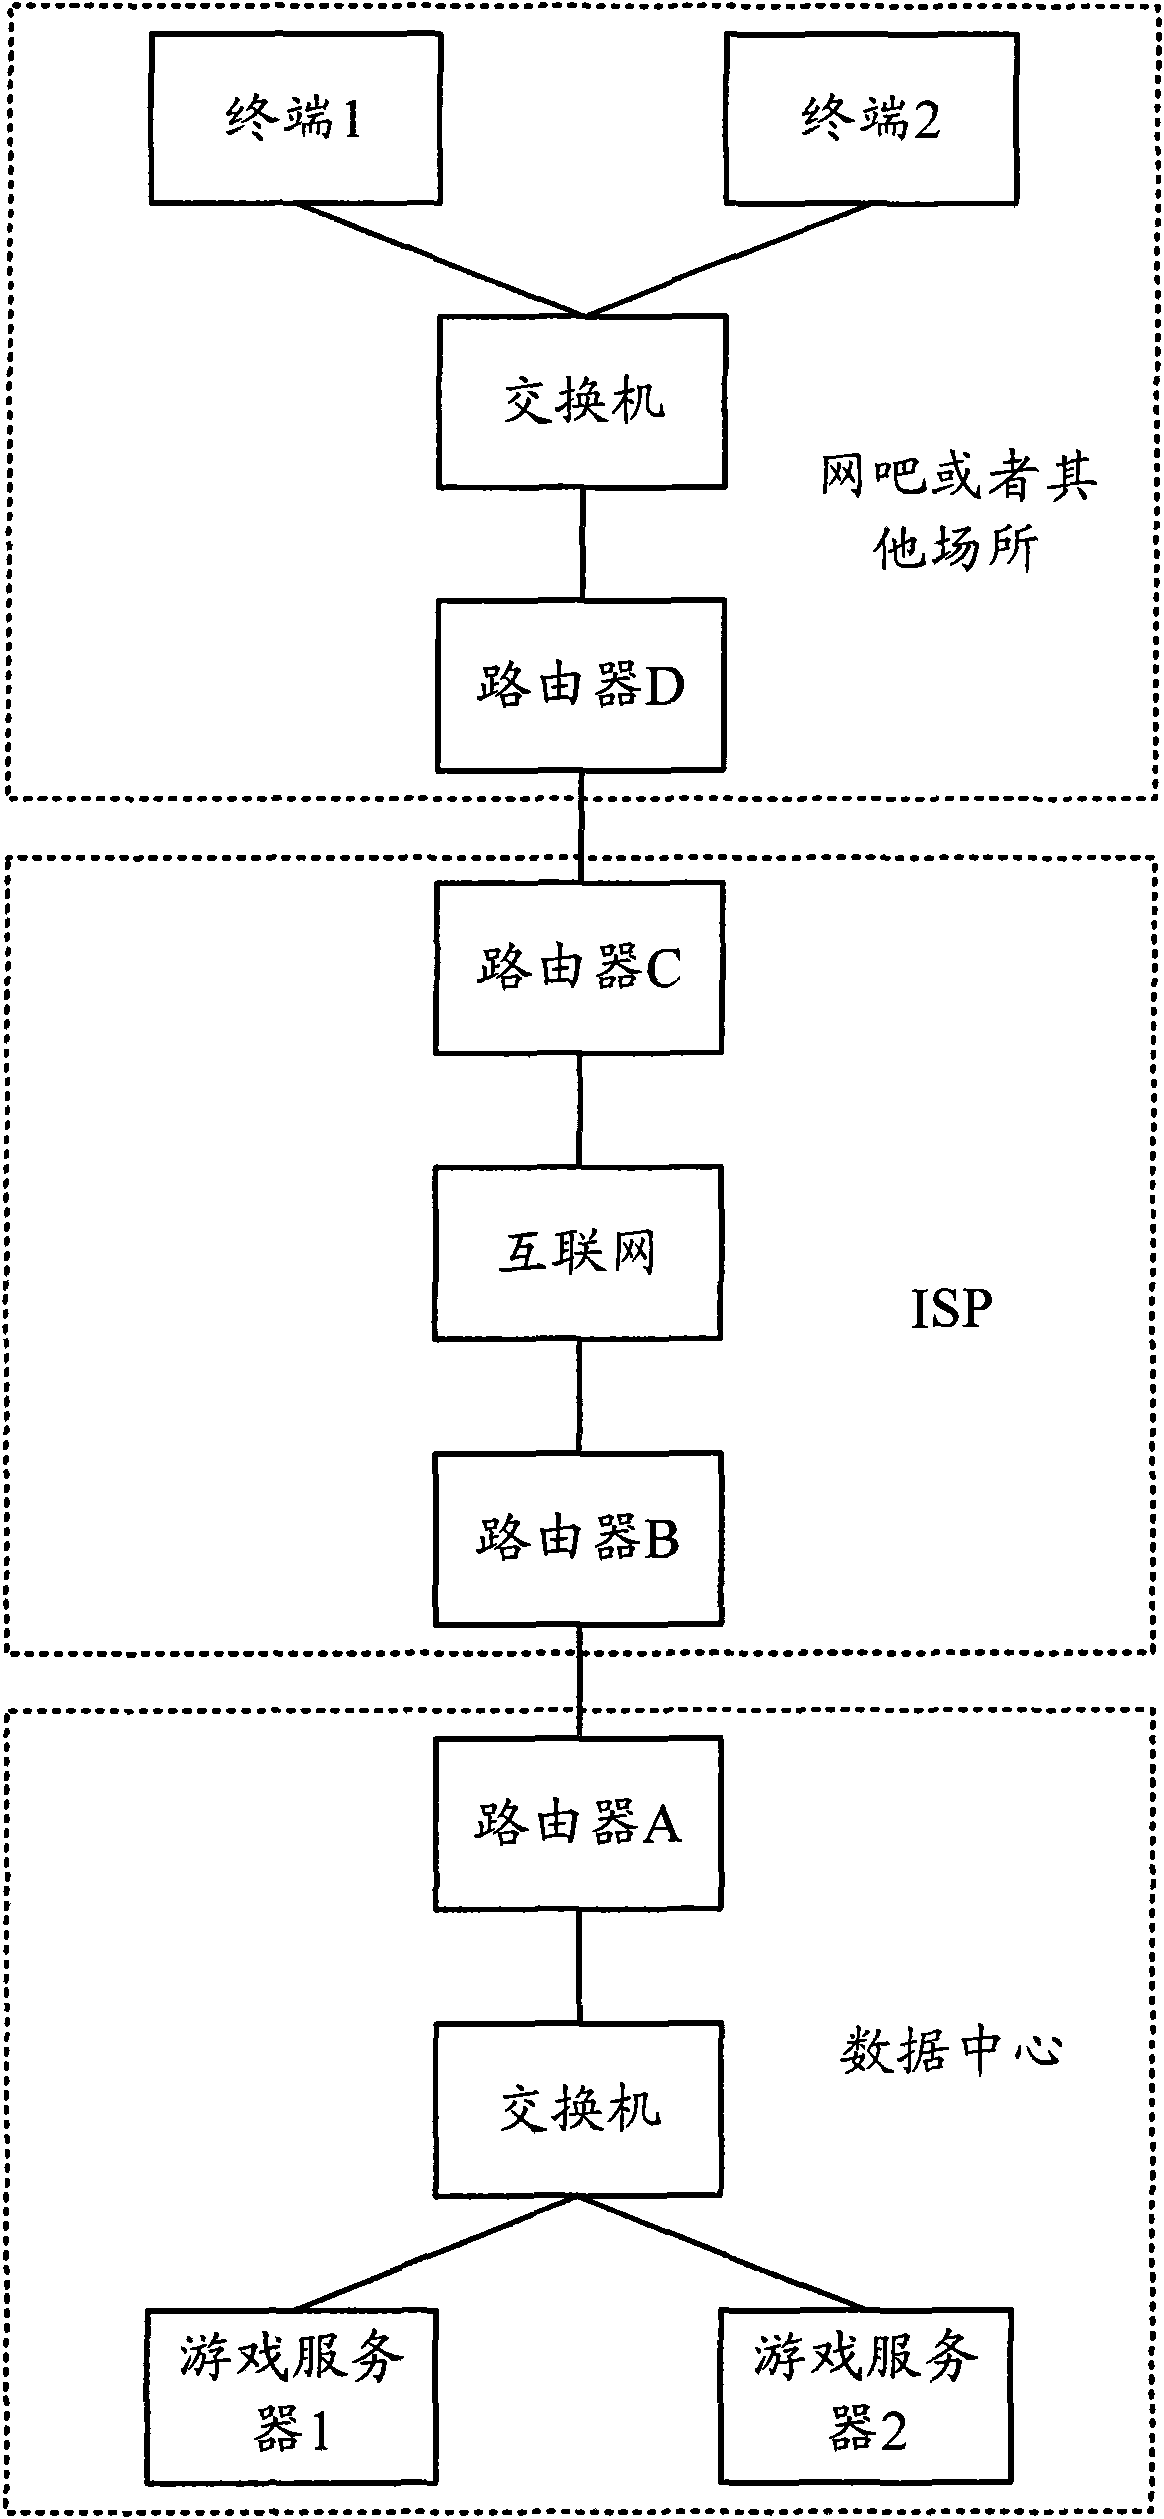 Method and device for dispatching TCP data stream